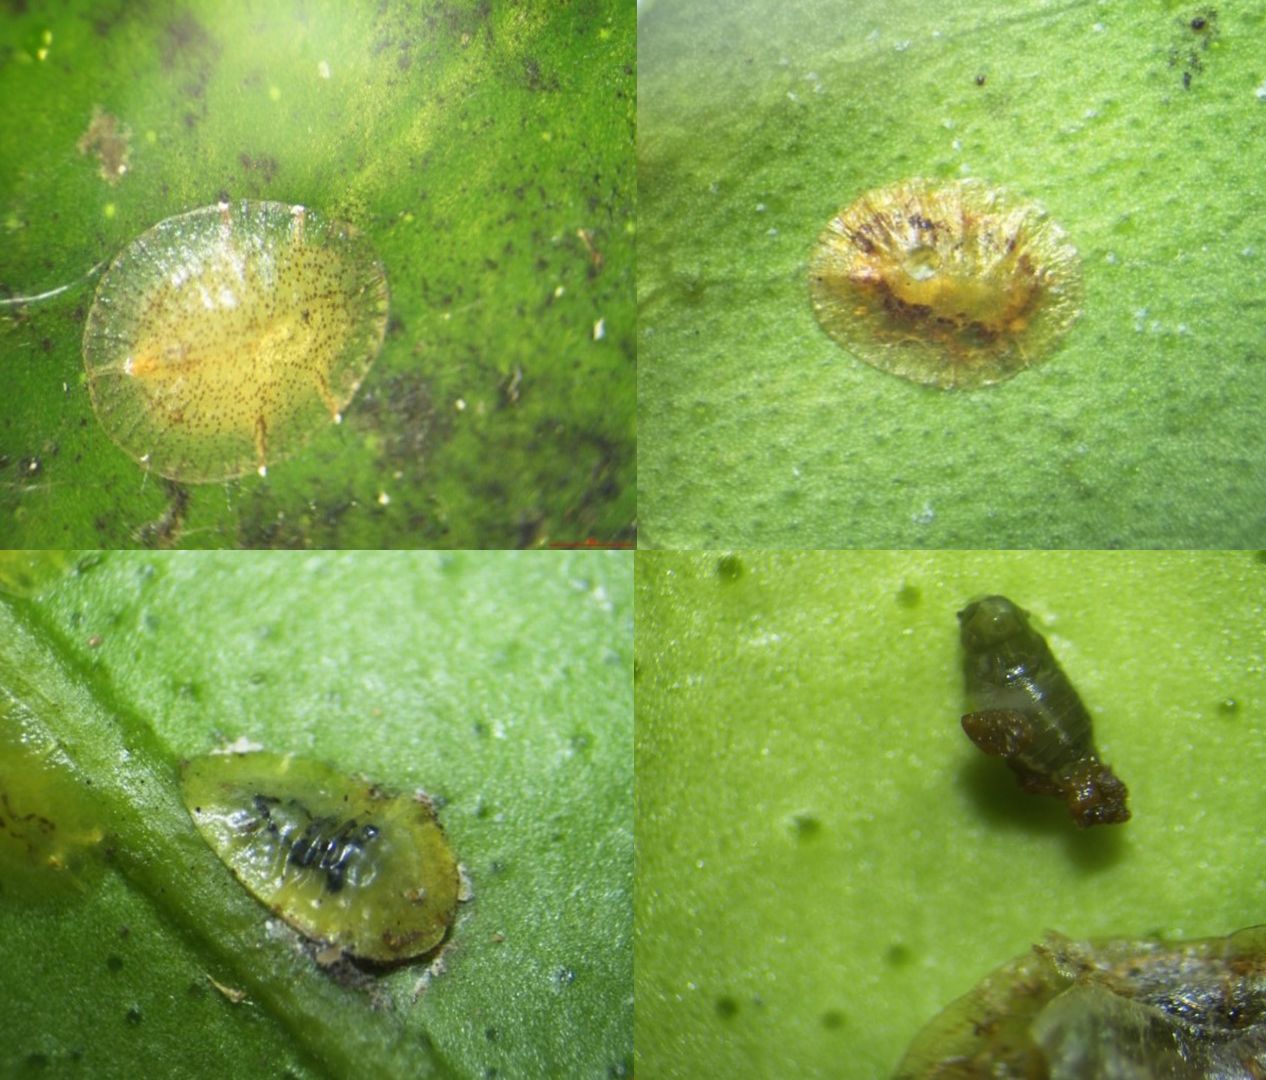 Coccophagus lycimnia developing in the green scale Coccus viridis (Coccidae: Hemiptera). Larvae developing (top left and right), prepupa (bottom left) and pupa (bottom right) in the green scale Coccus viridis. The pupa taken out from the green scale showing the dorsal view. 